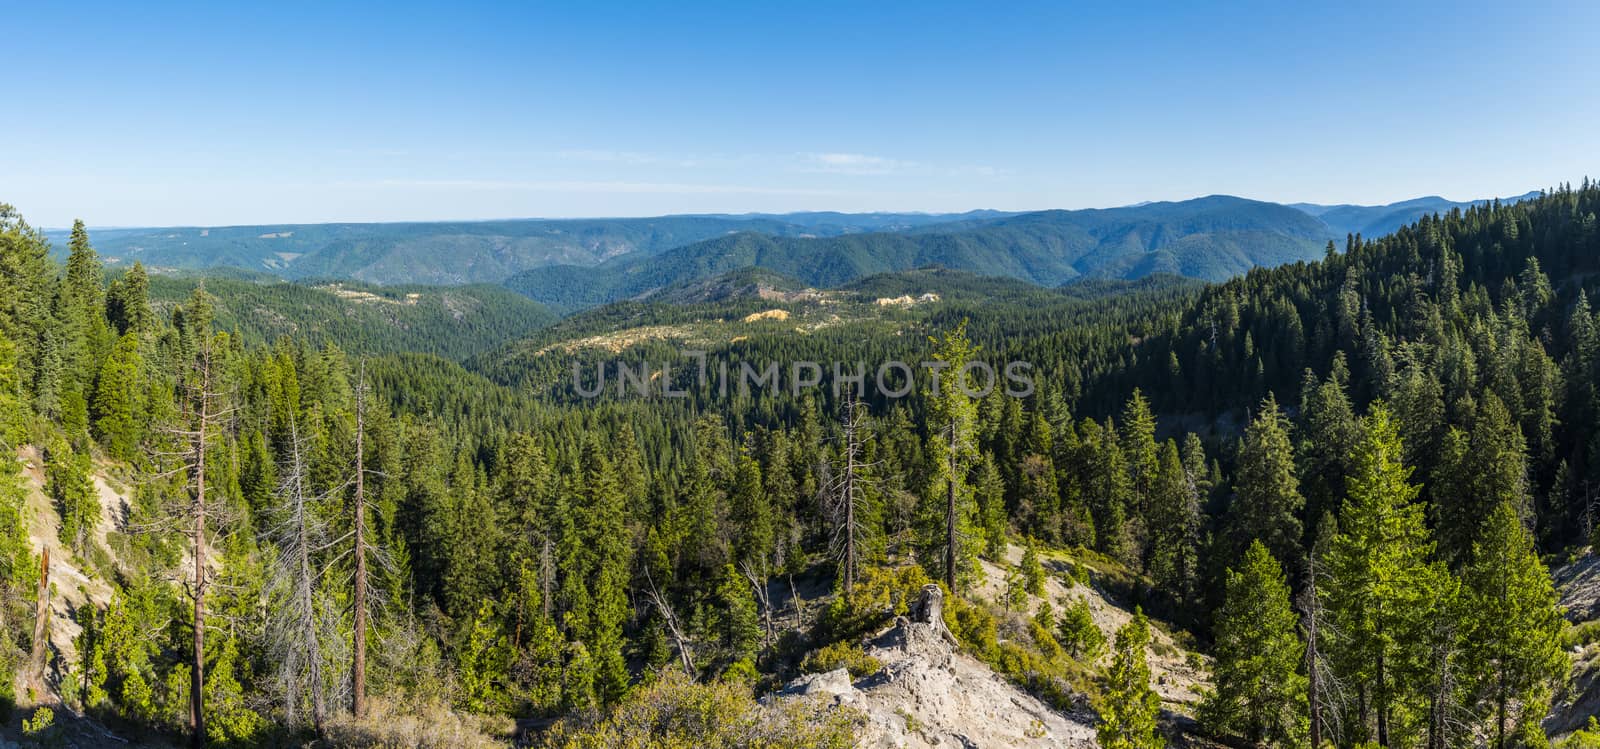 Panoramic view of Tahoe National forest and Sierra Nevada mountains on the route 80 from California to Nevada, USA